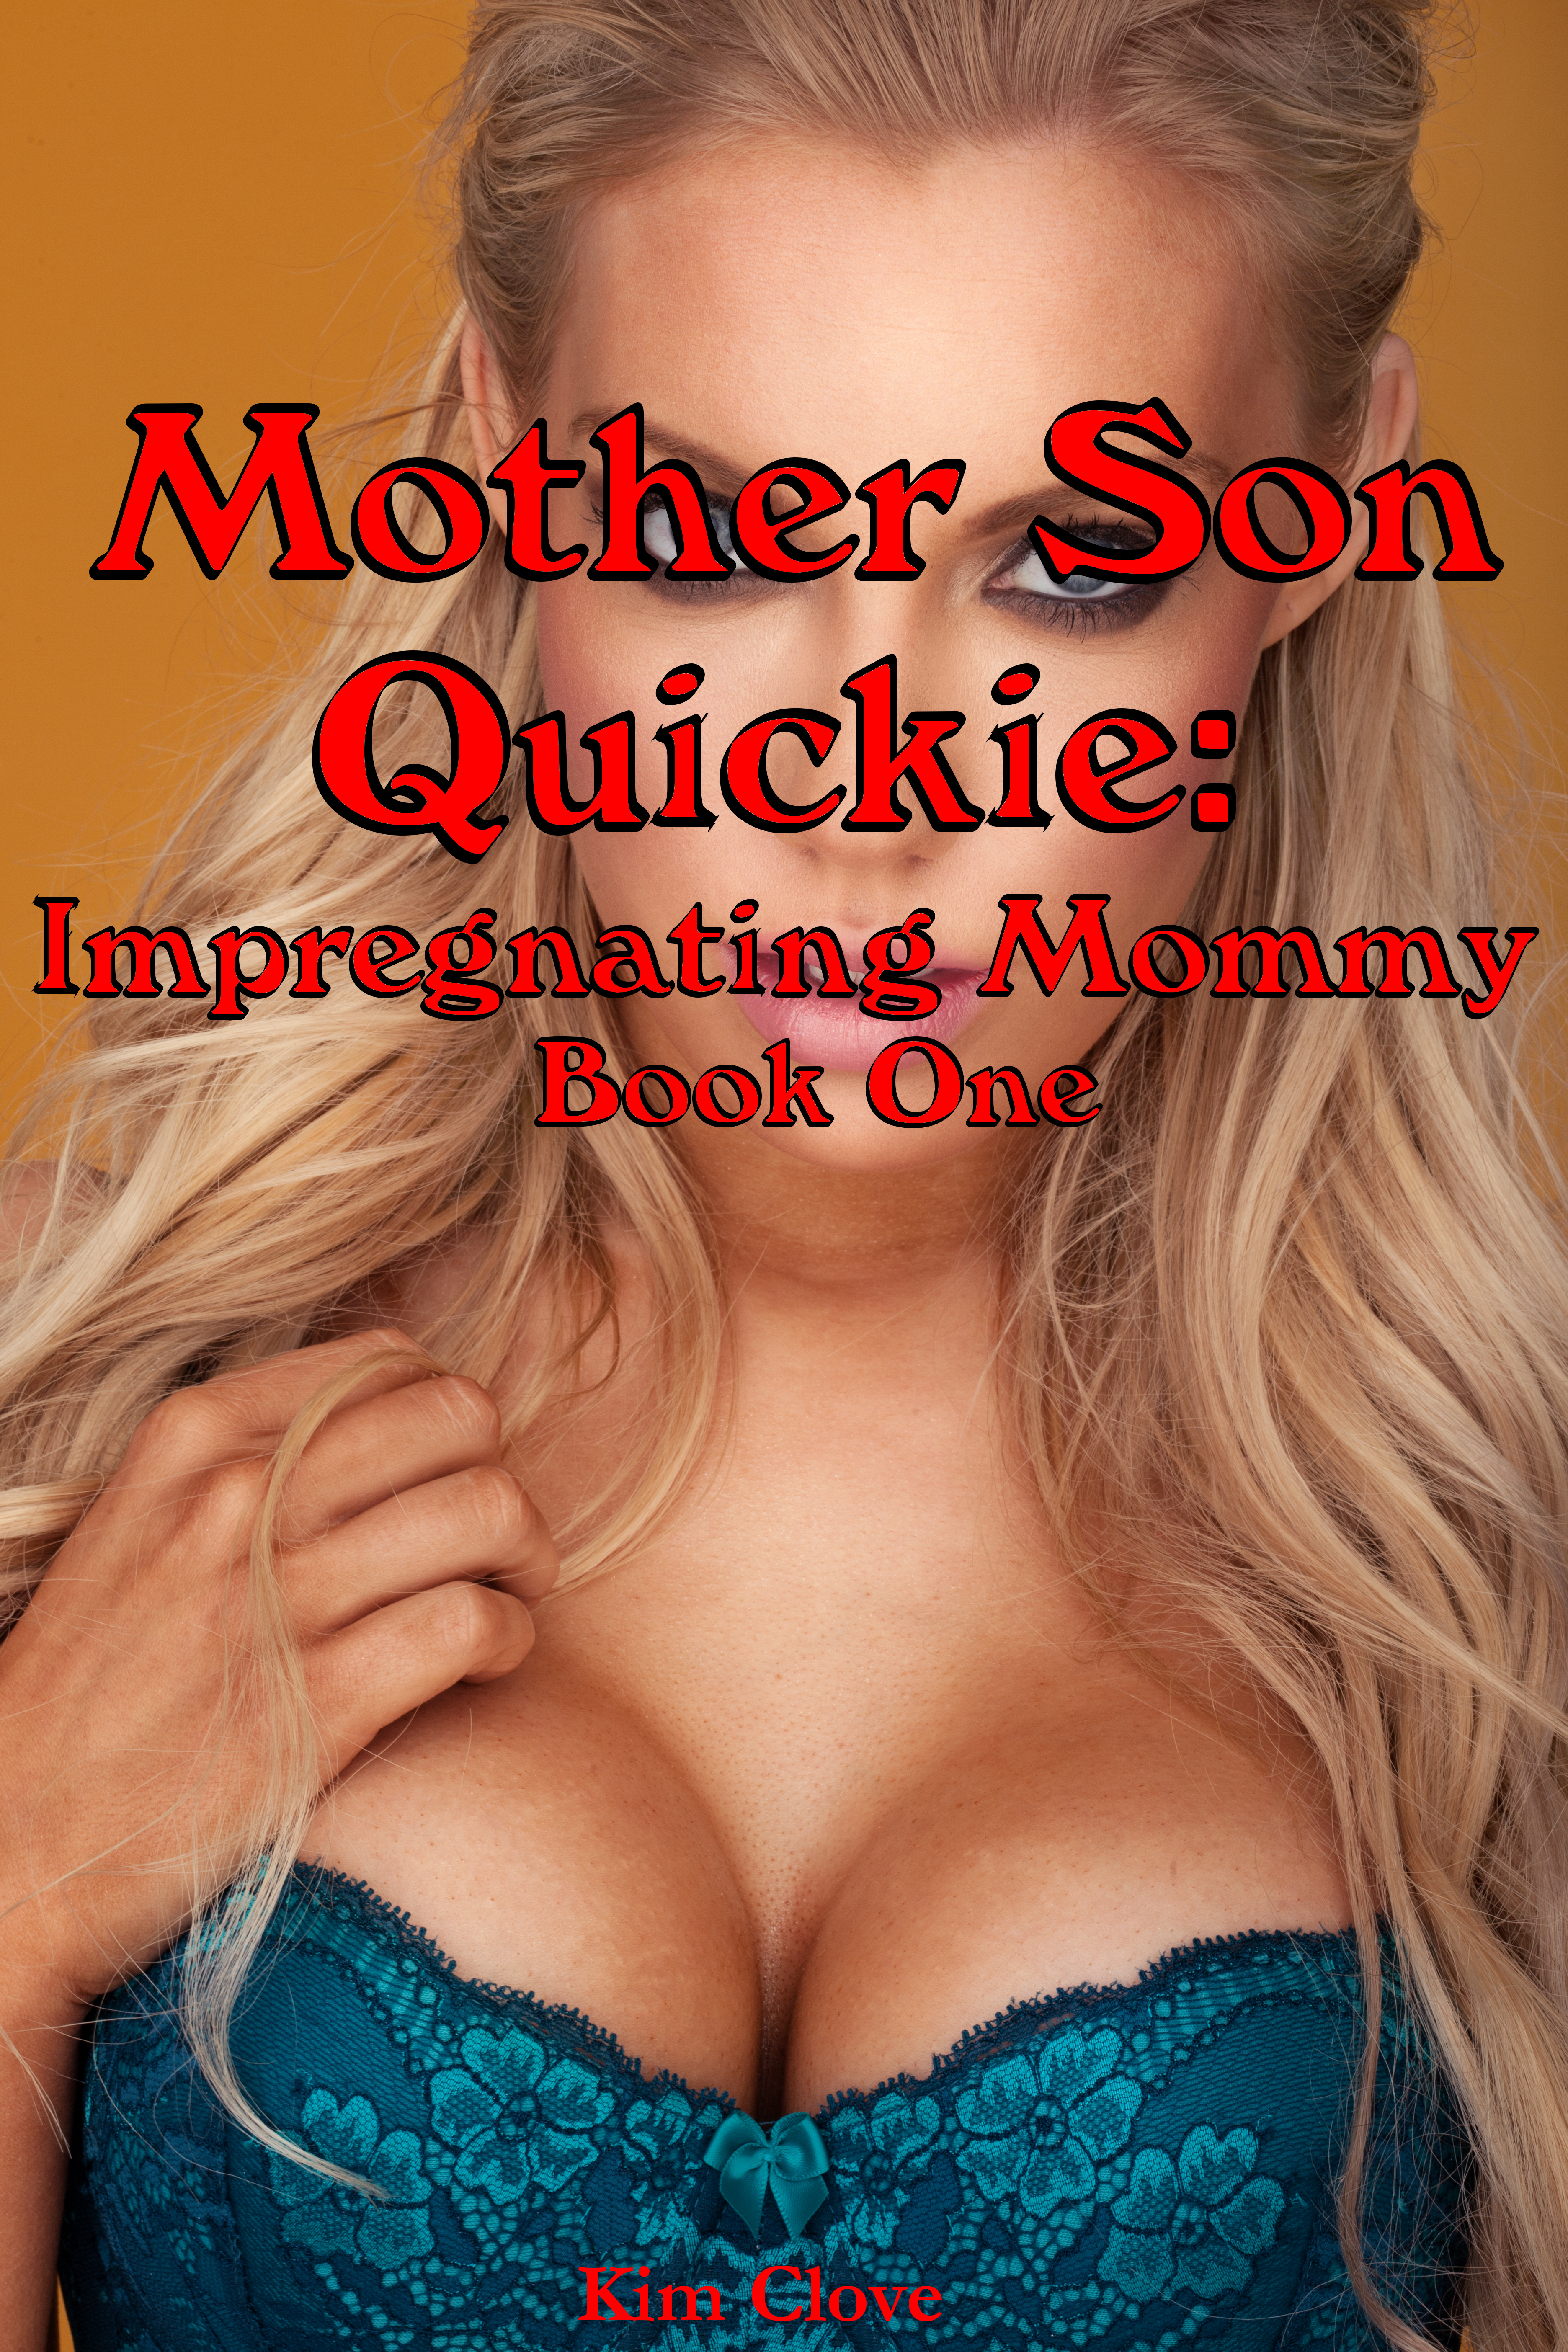 Mother Son Incest Mating Press Captions